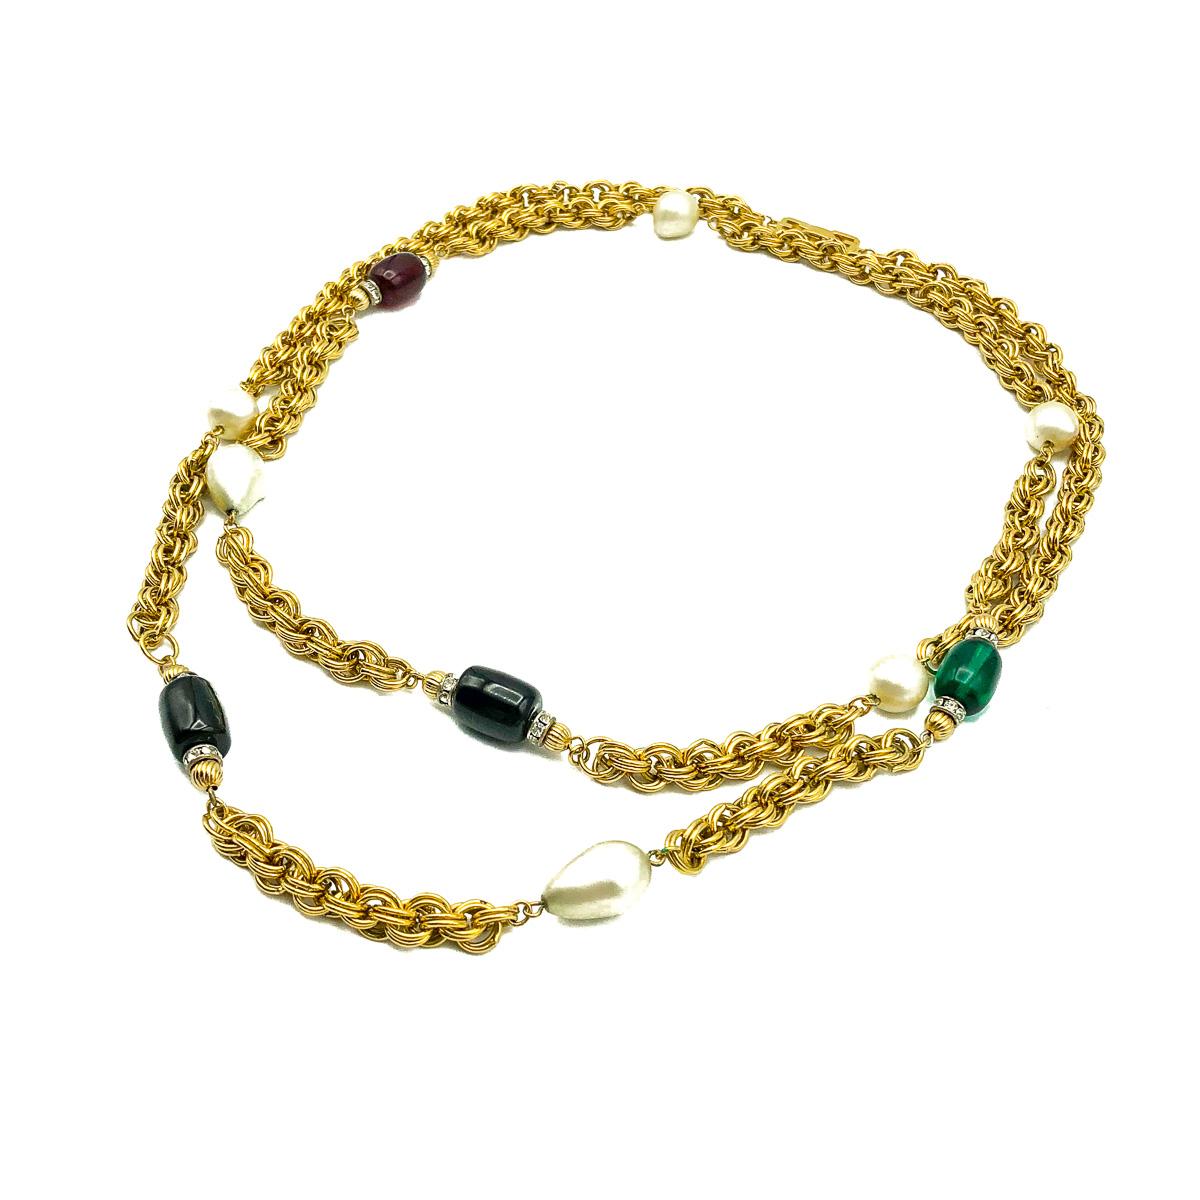 A stand-out vintage Givenchy Poured Glass Sautoir. Crafted with gold plated metal, poured glass/pate de verre pearls and glass paste embellished rondelles. Featuring a long fancy link chain interspersed with ruby red, emerald green and onyx black